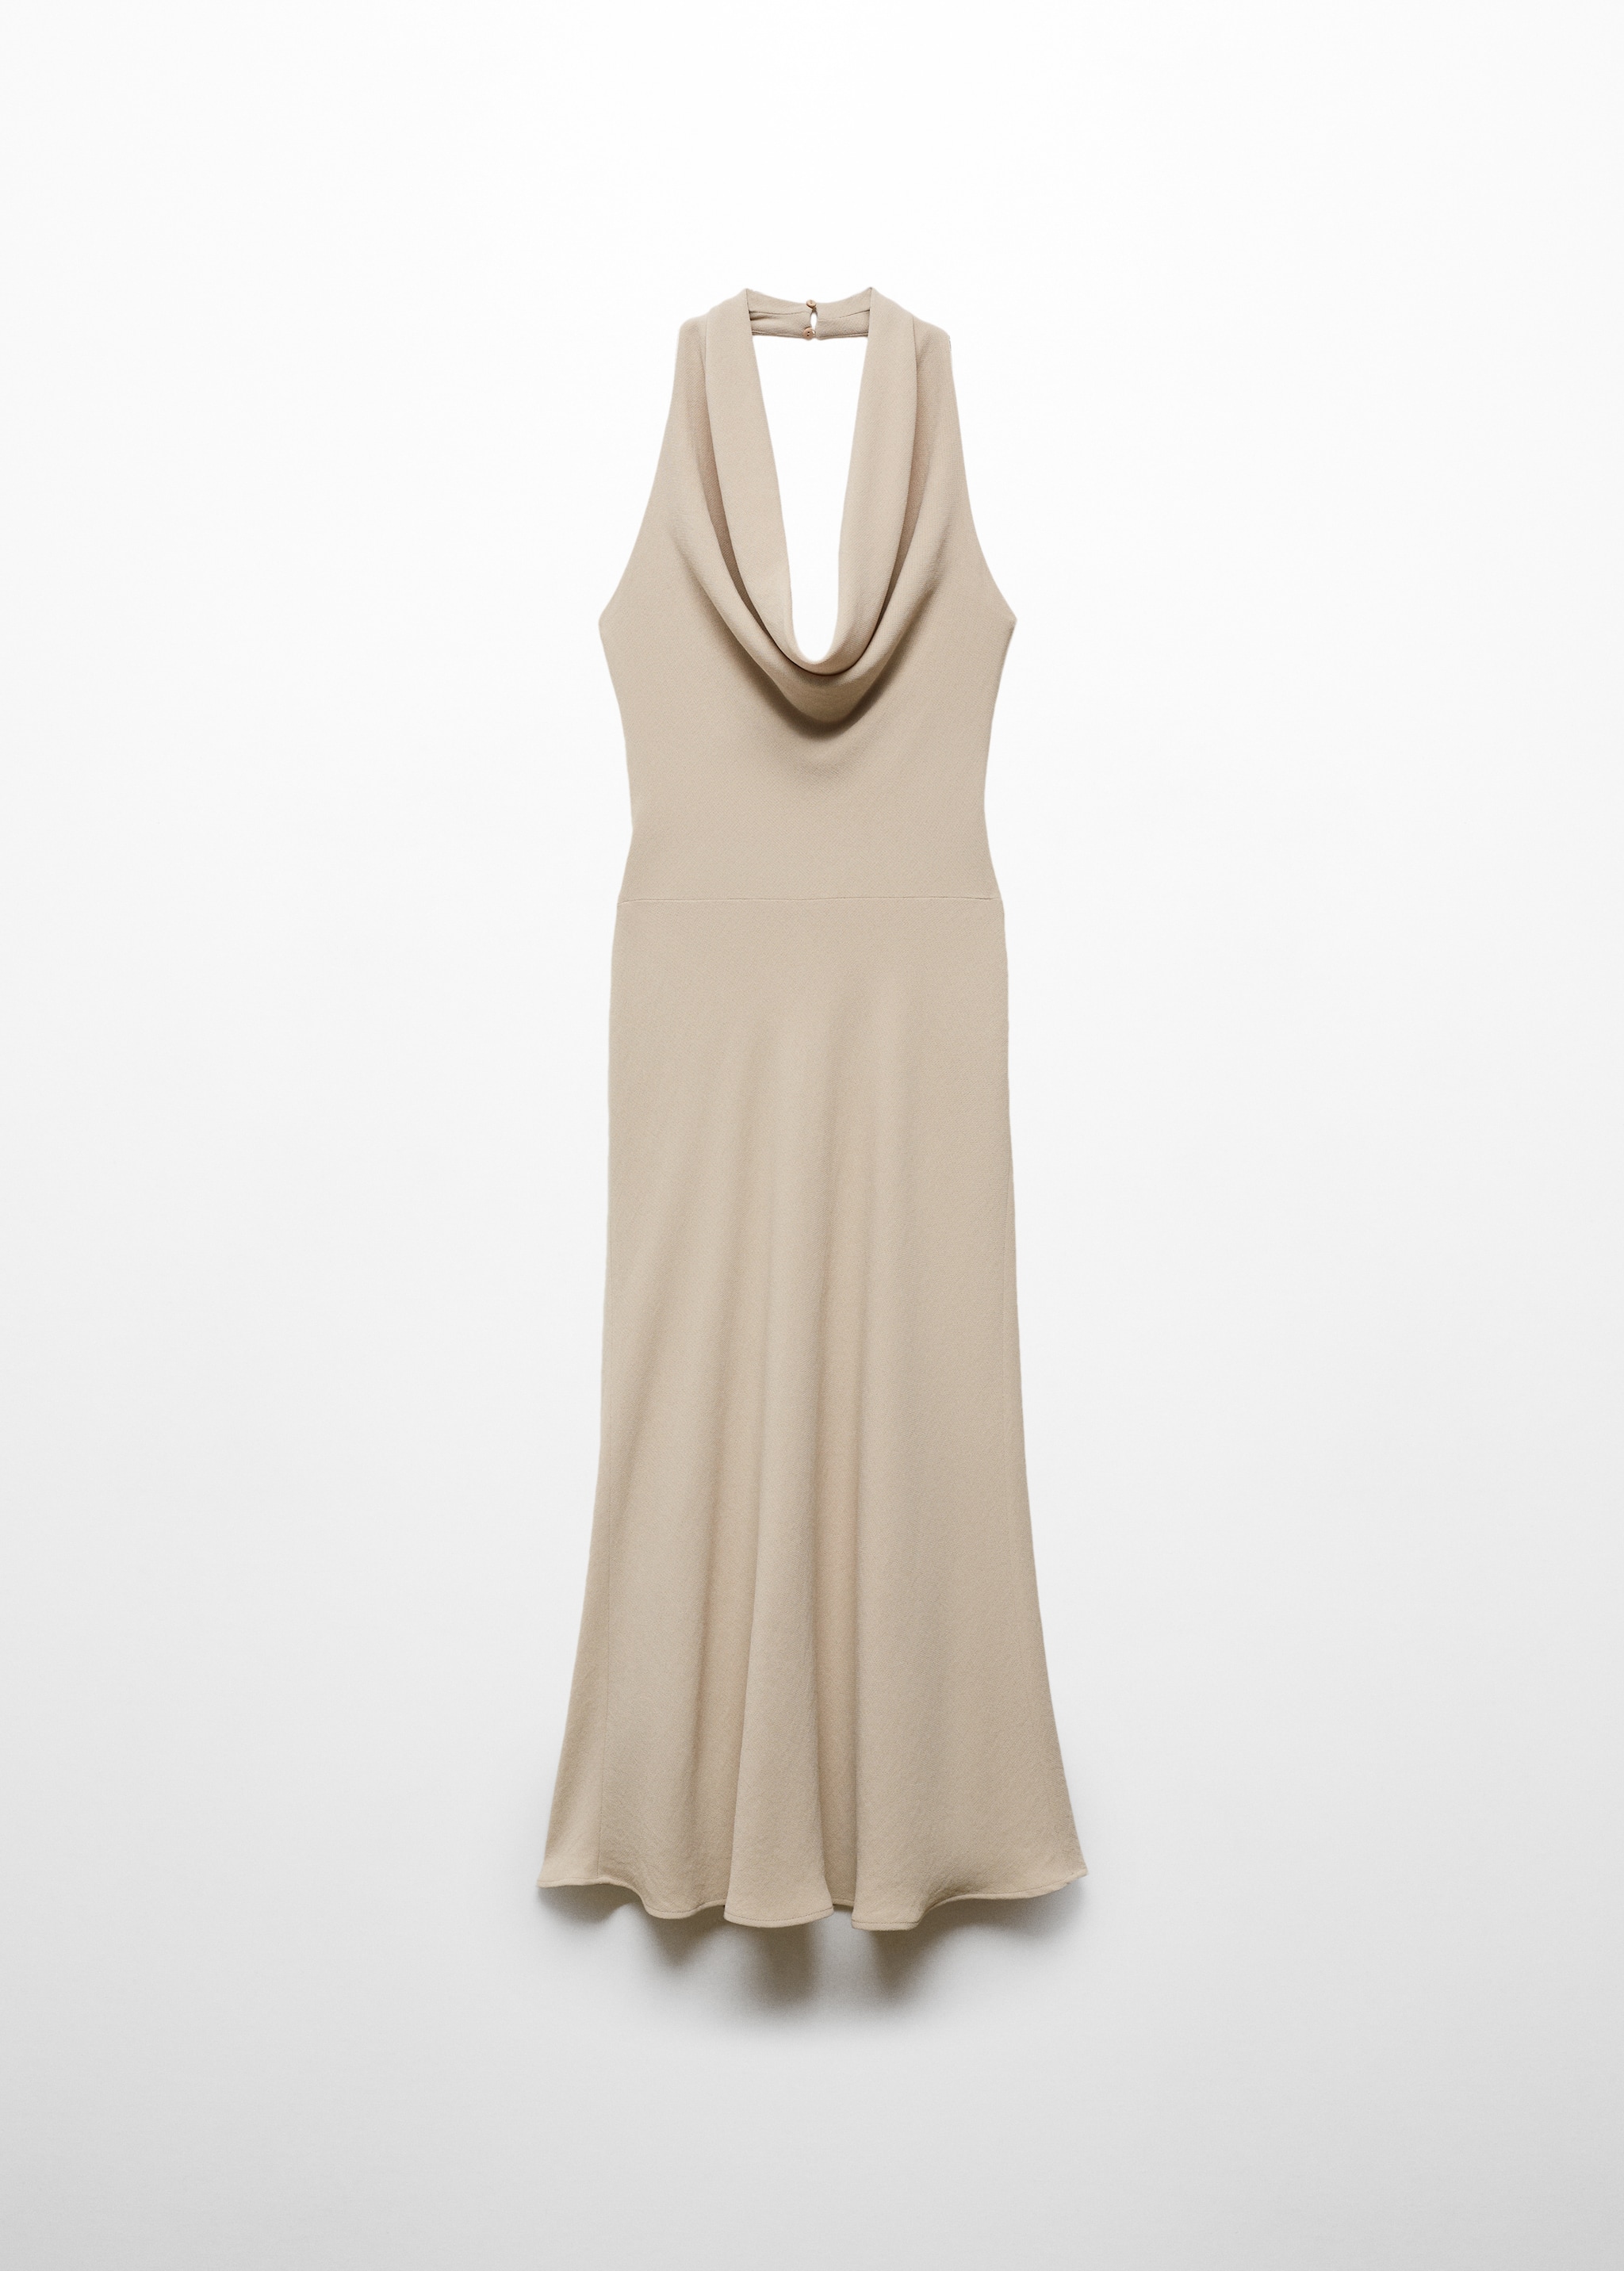 Halter dress with draped neckline - Article without model